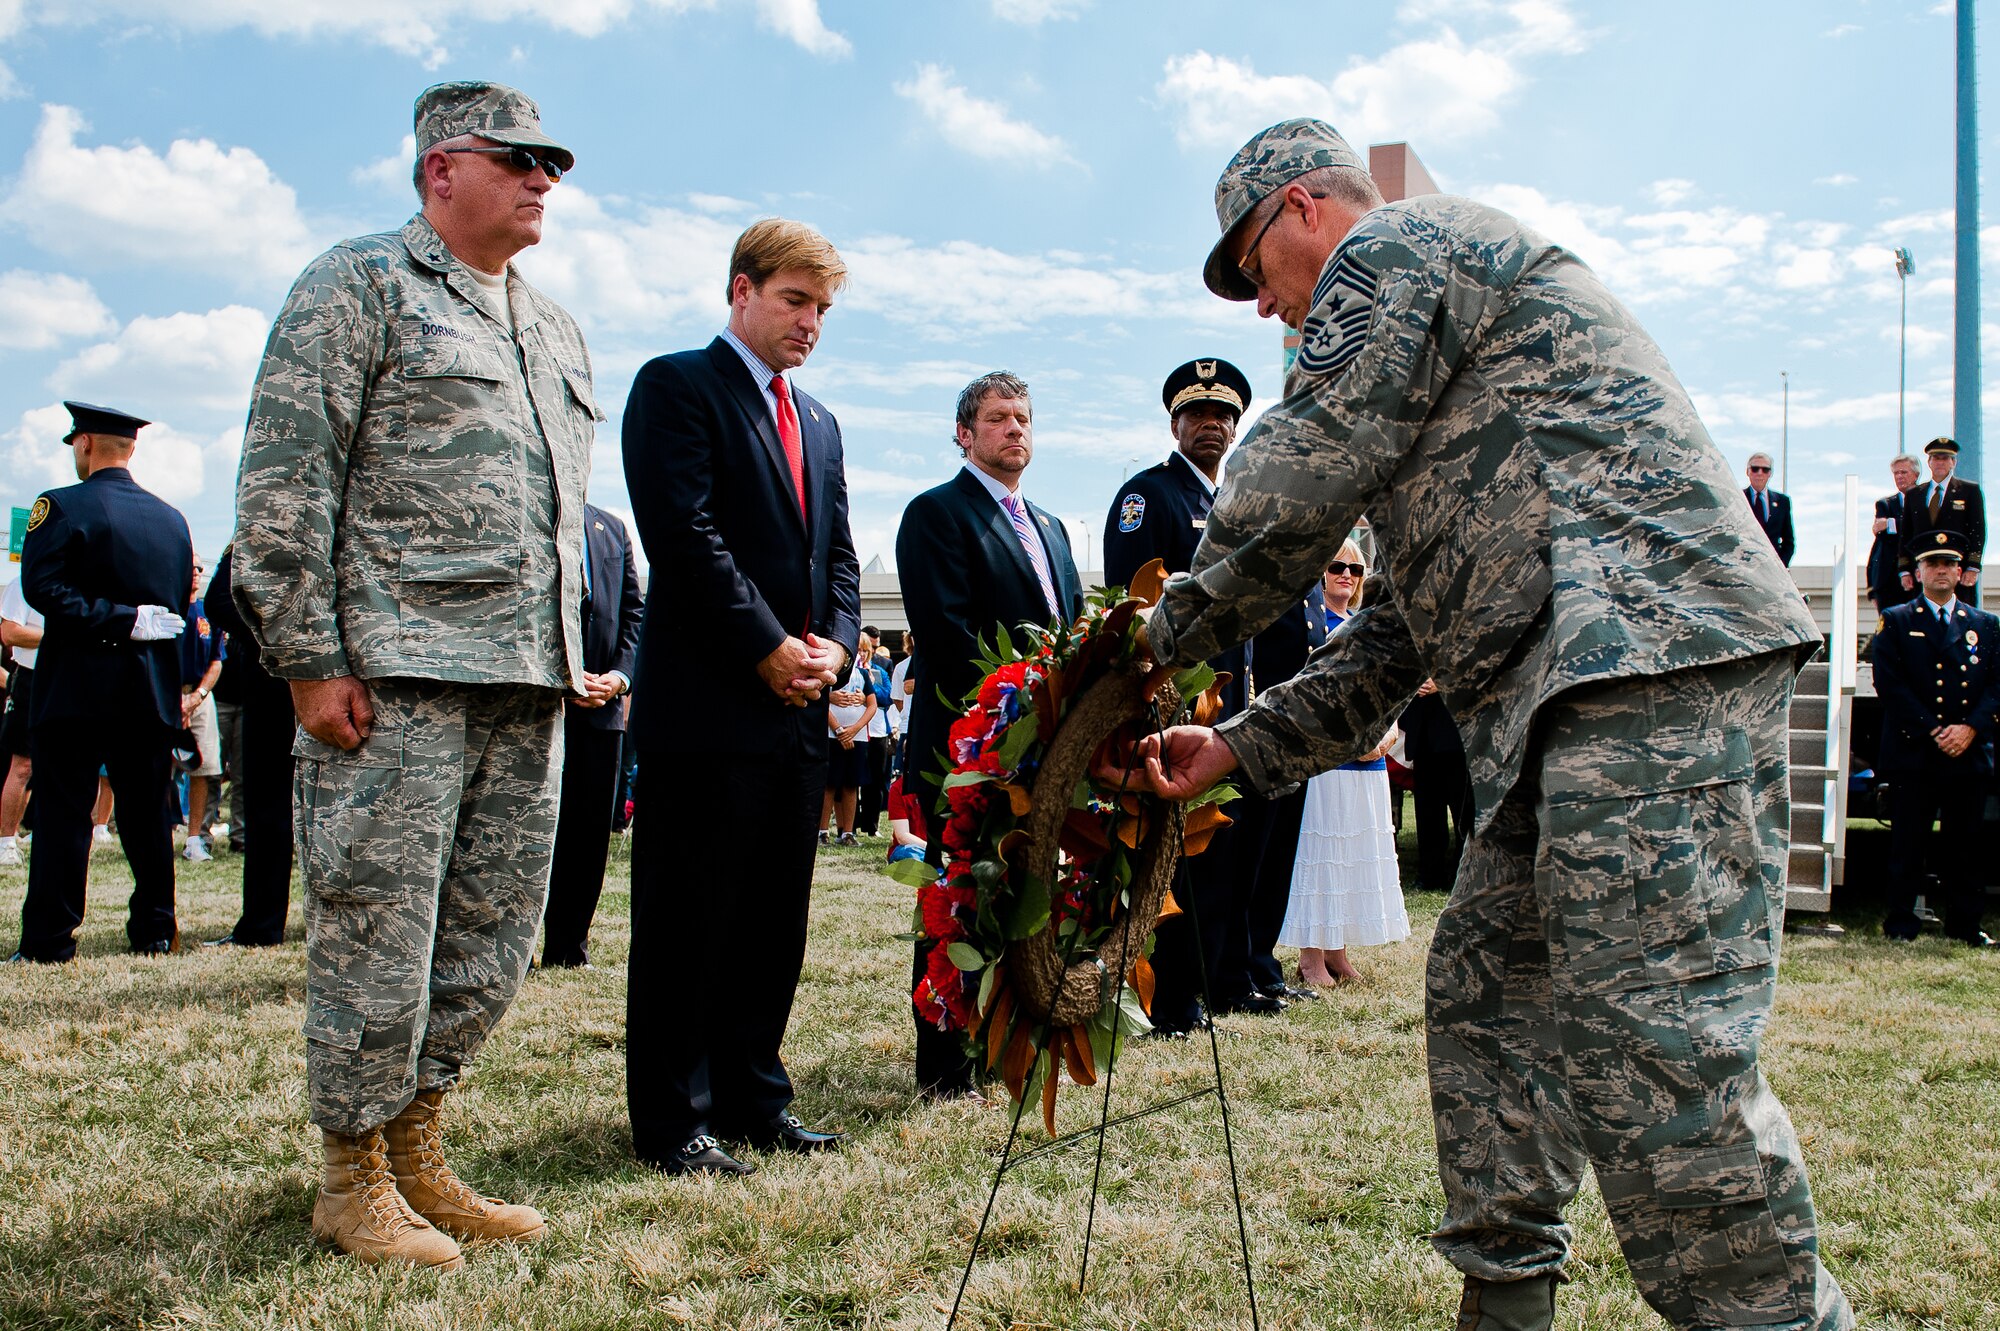 Brig. Gen. Michael Dornbush (left), chief of joint staff for the Kentucky National Guard's Joint Forces Headquarters, and Chief Master Sgt. James Smith, state command chief master sergeant (right), prepare to place a wreath in front of the 9/11 Memorial Sculpture at Waterfront Park in Louisville, Ky., Sept. 11, 2011, during city's 10th anniversary observance of the 9/11 terrorist attacks on the United States. The sculpture is made from steel taken from the wreckage of the World Trade Center. (U.S. Air Force photo by Maj. Dale Greer)